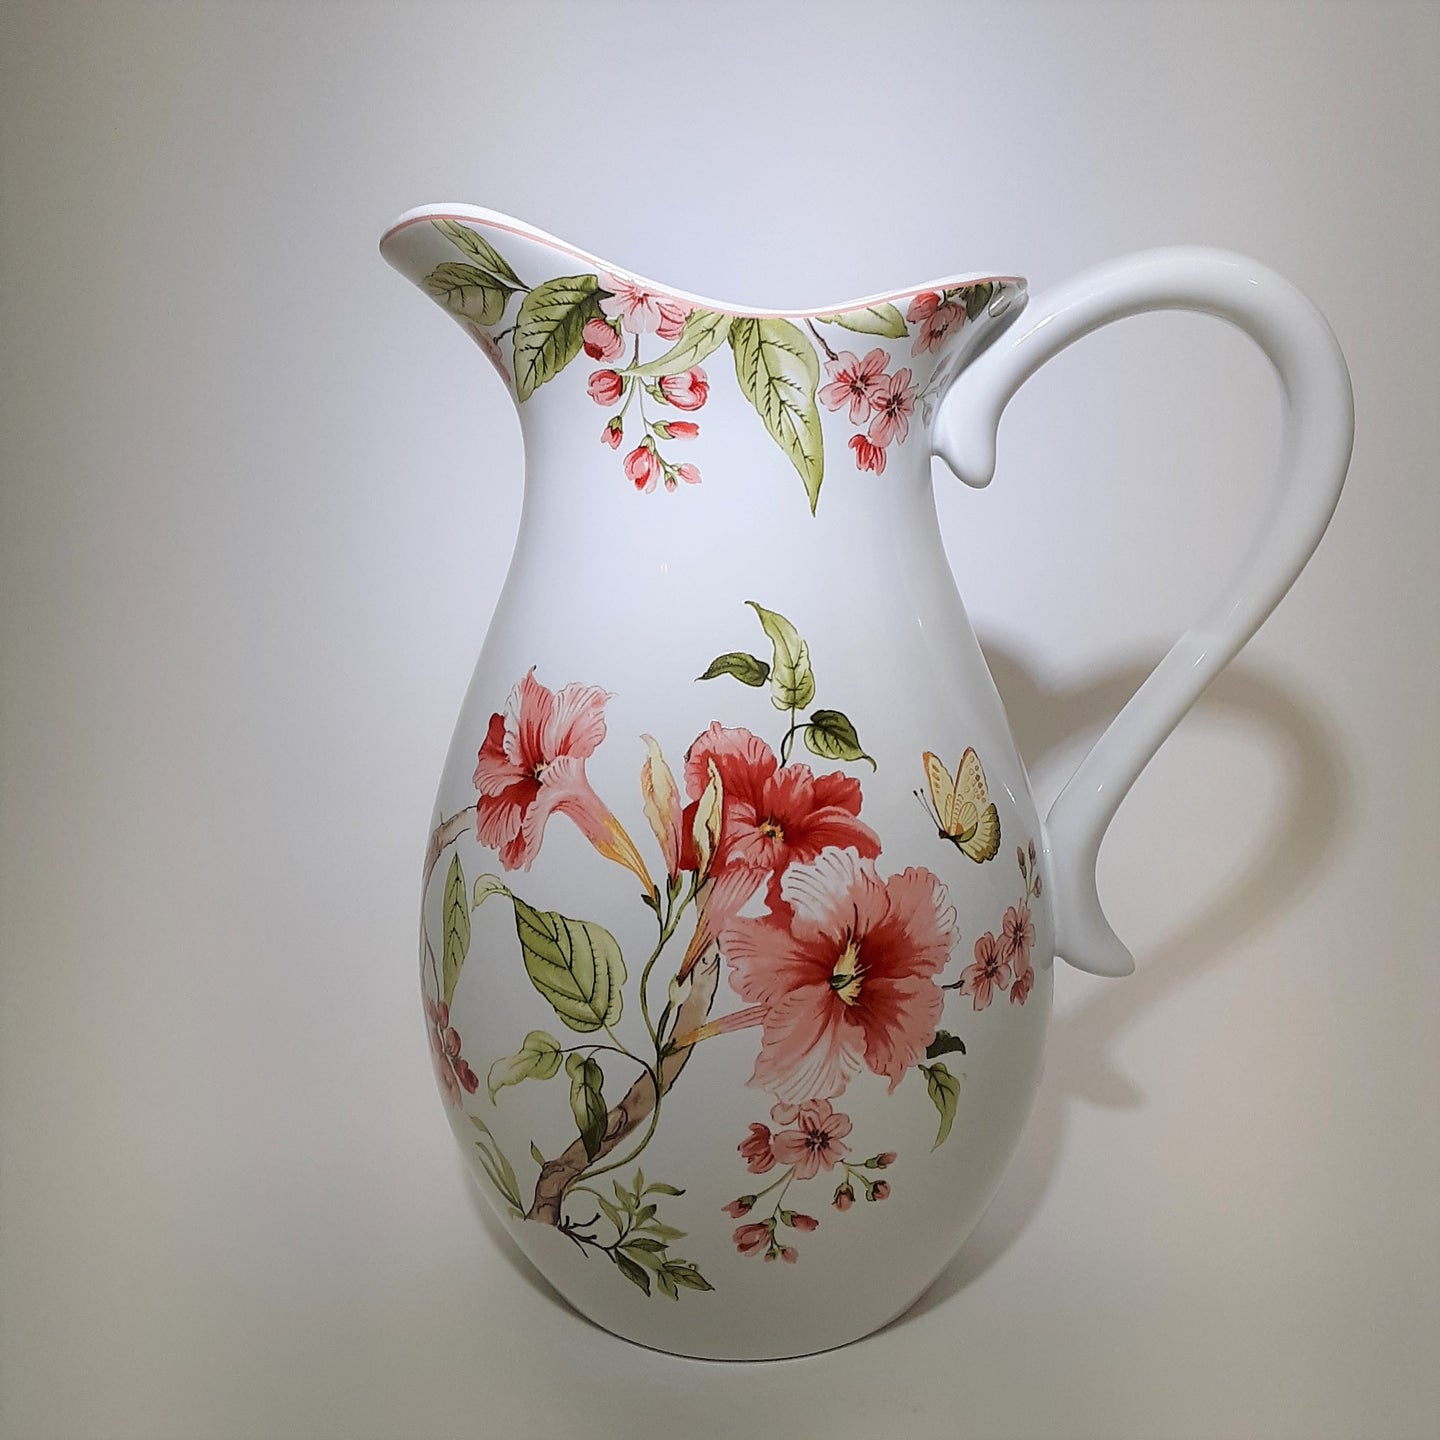 222 Fifth Lyanna Red 96 Oz. White/ Floral Pitcher